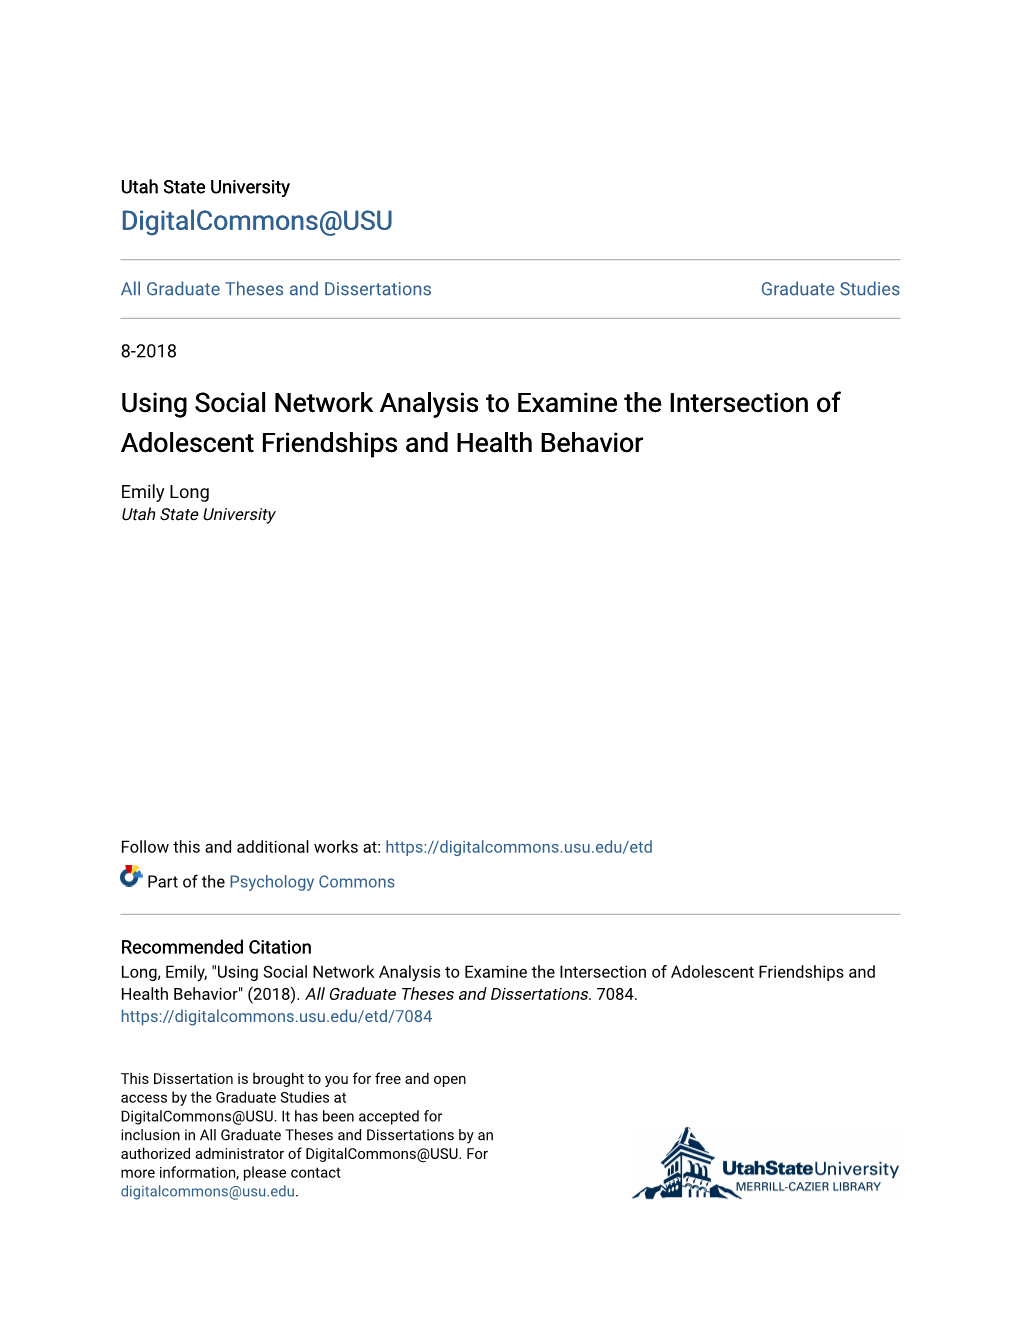 Using Social Network Analysis to Examine the Intersection of Adolescent Friendships and Health Behavior